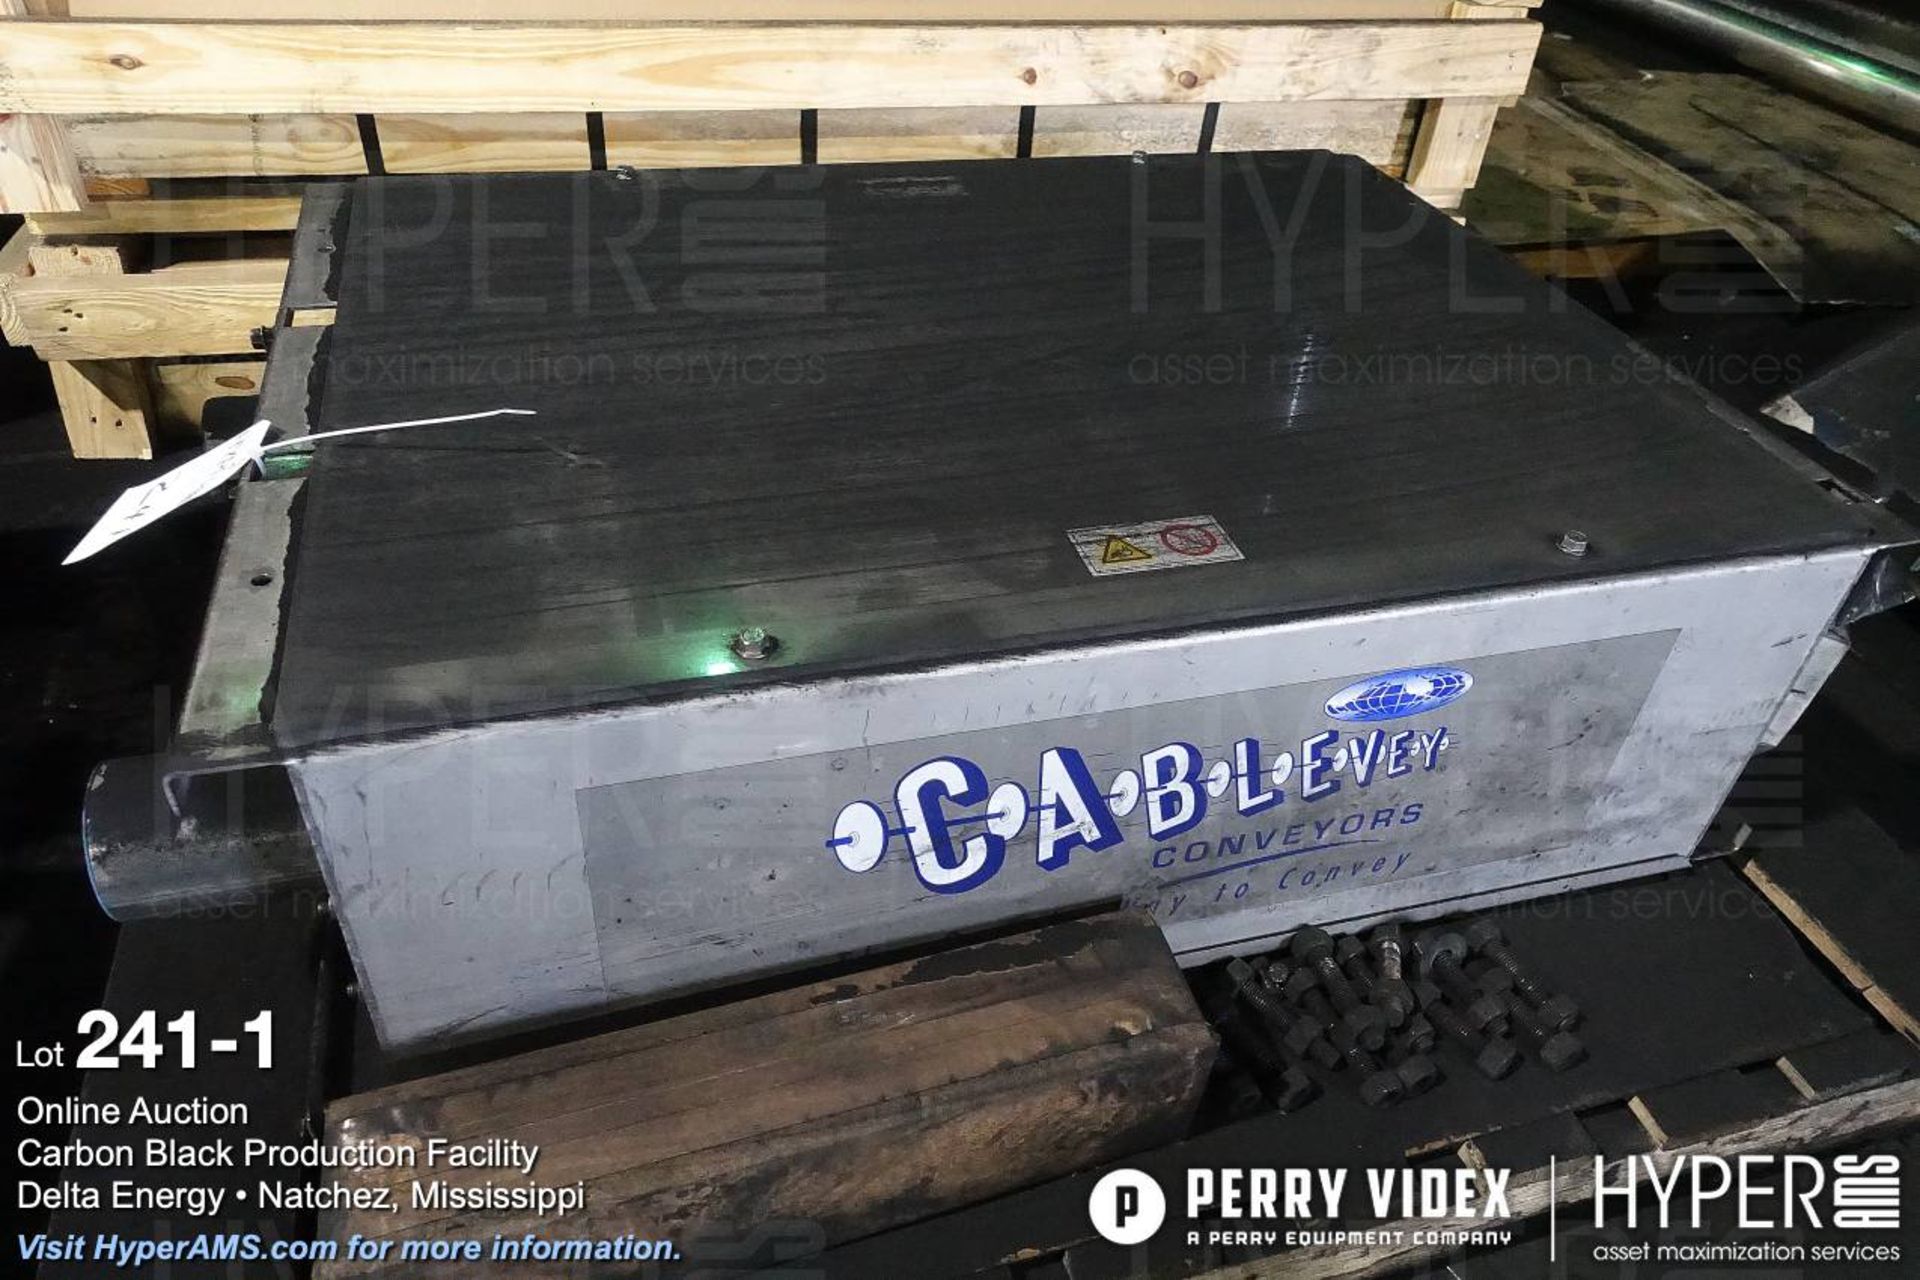 Cablevey Conveyors 4"